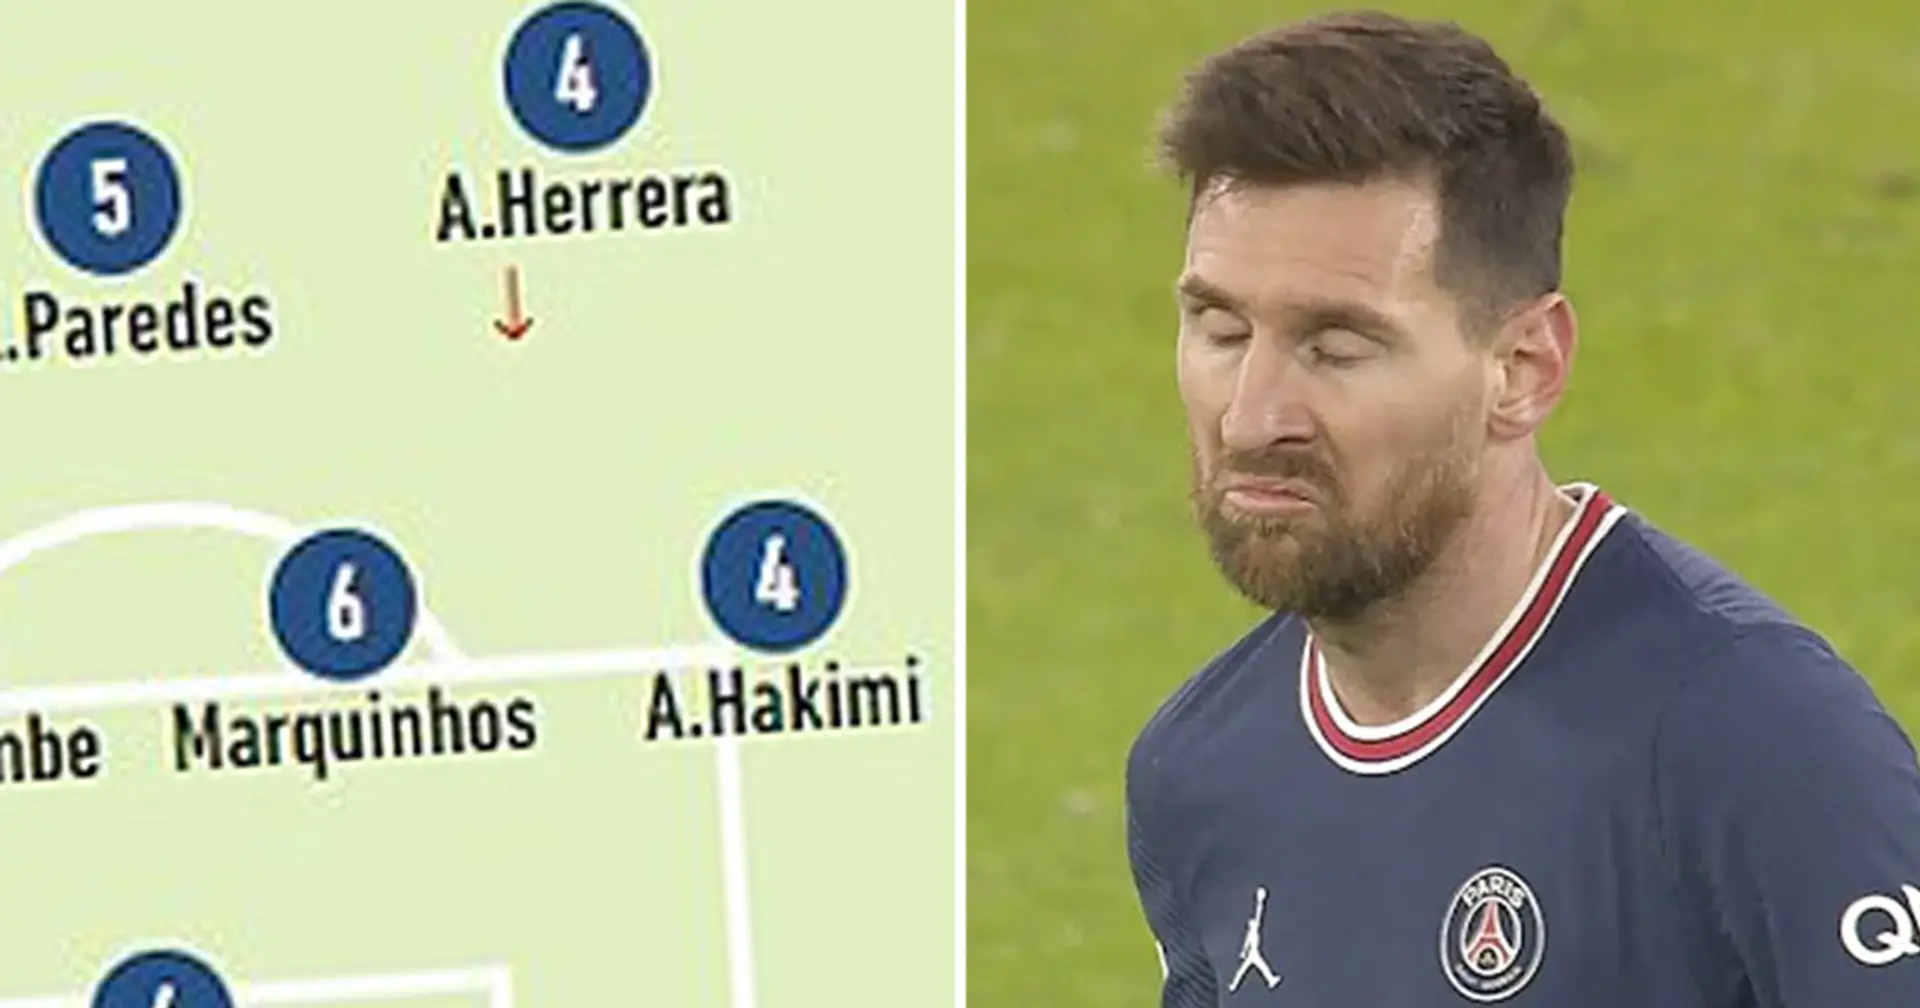 'Hit or miss': Messi named among worst PSG players in Man City clash